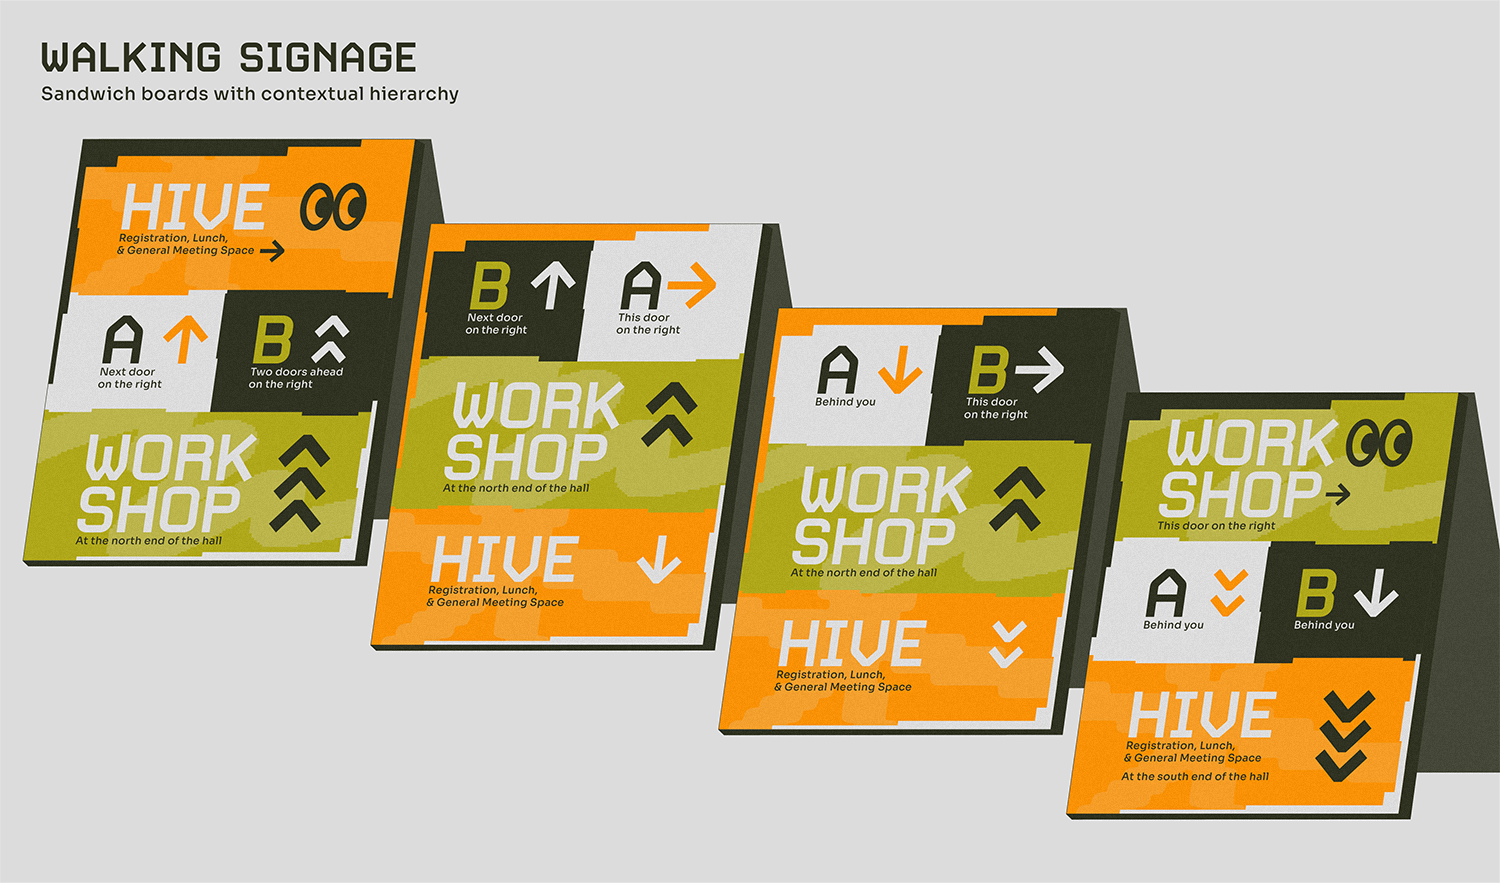 "Walking Signage- Sandwich boards with contextual hierarchy". Leaning signs sectioned into 4, "Hive (in orange), A (in white), B (In black), Workshop (in olive green). The room the sign is pointing to is presented at the top.